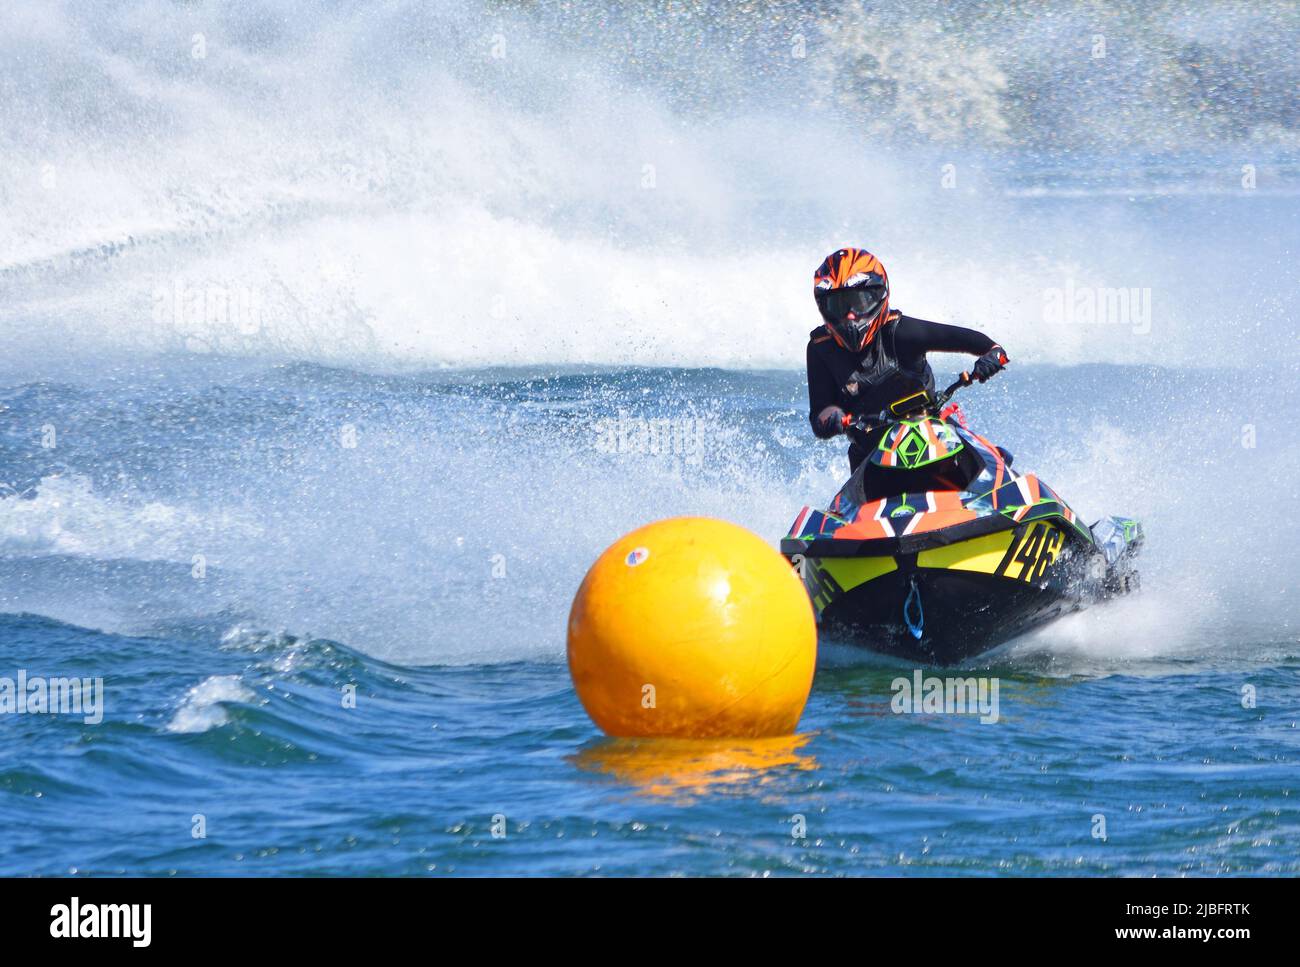 Jet Ski competitor cornering at speed creating at lot of spray. Stock Photo